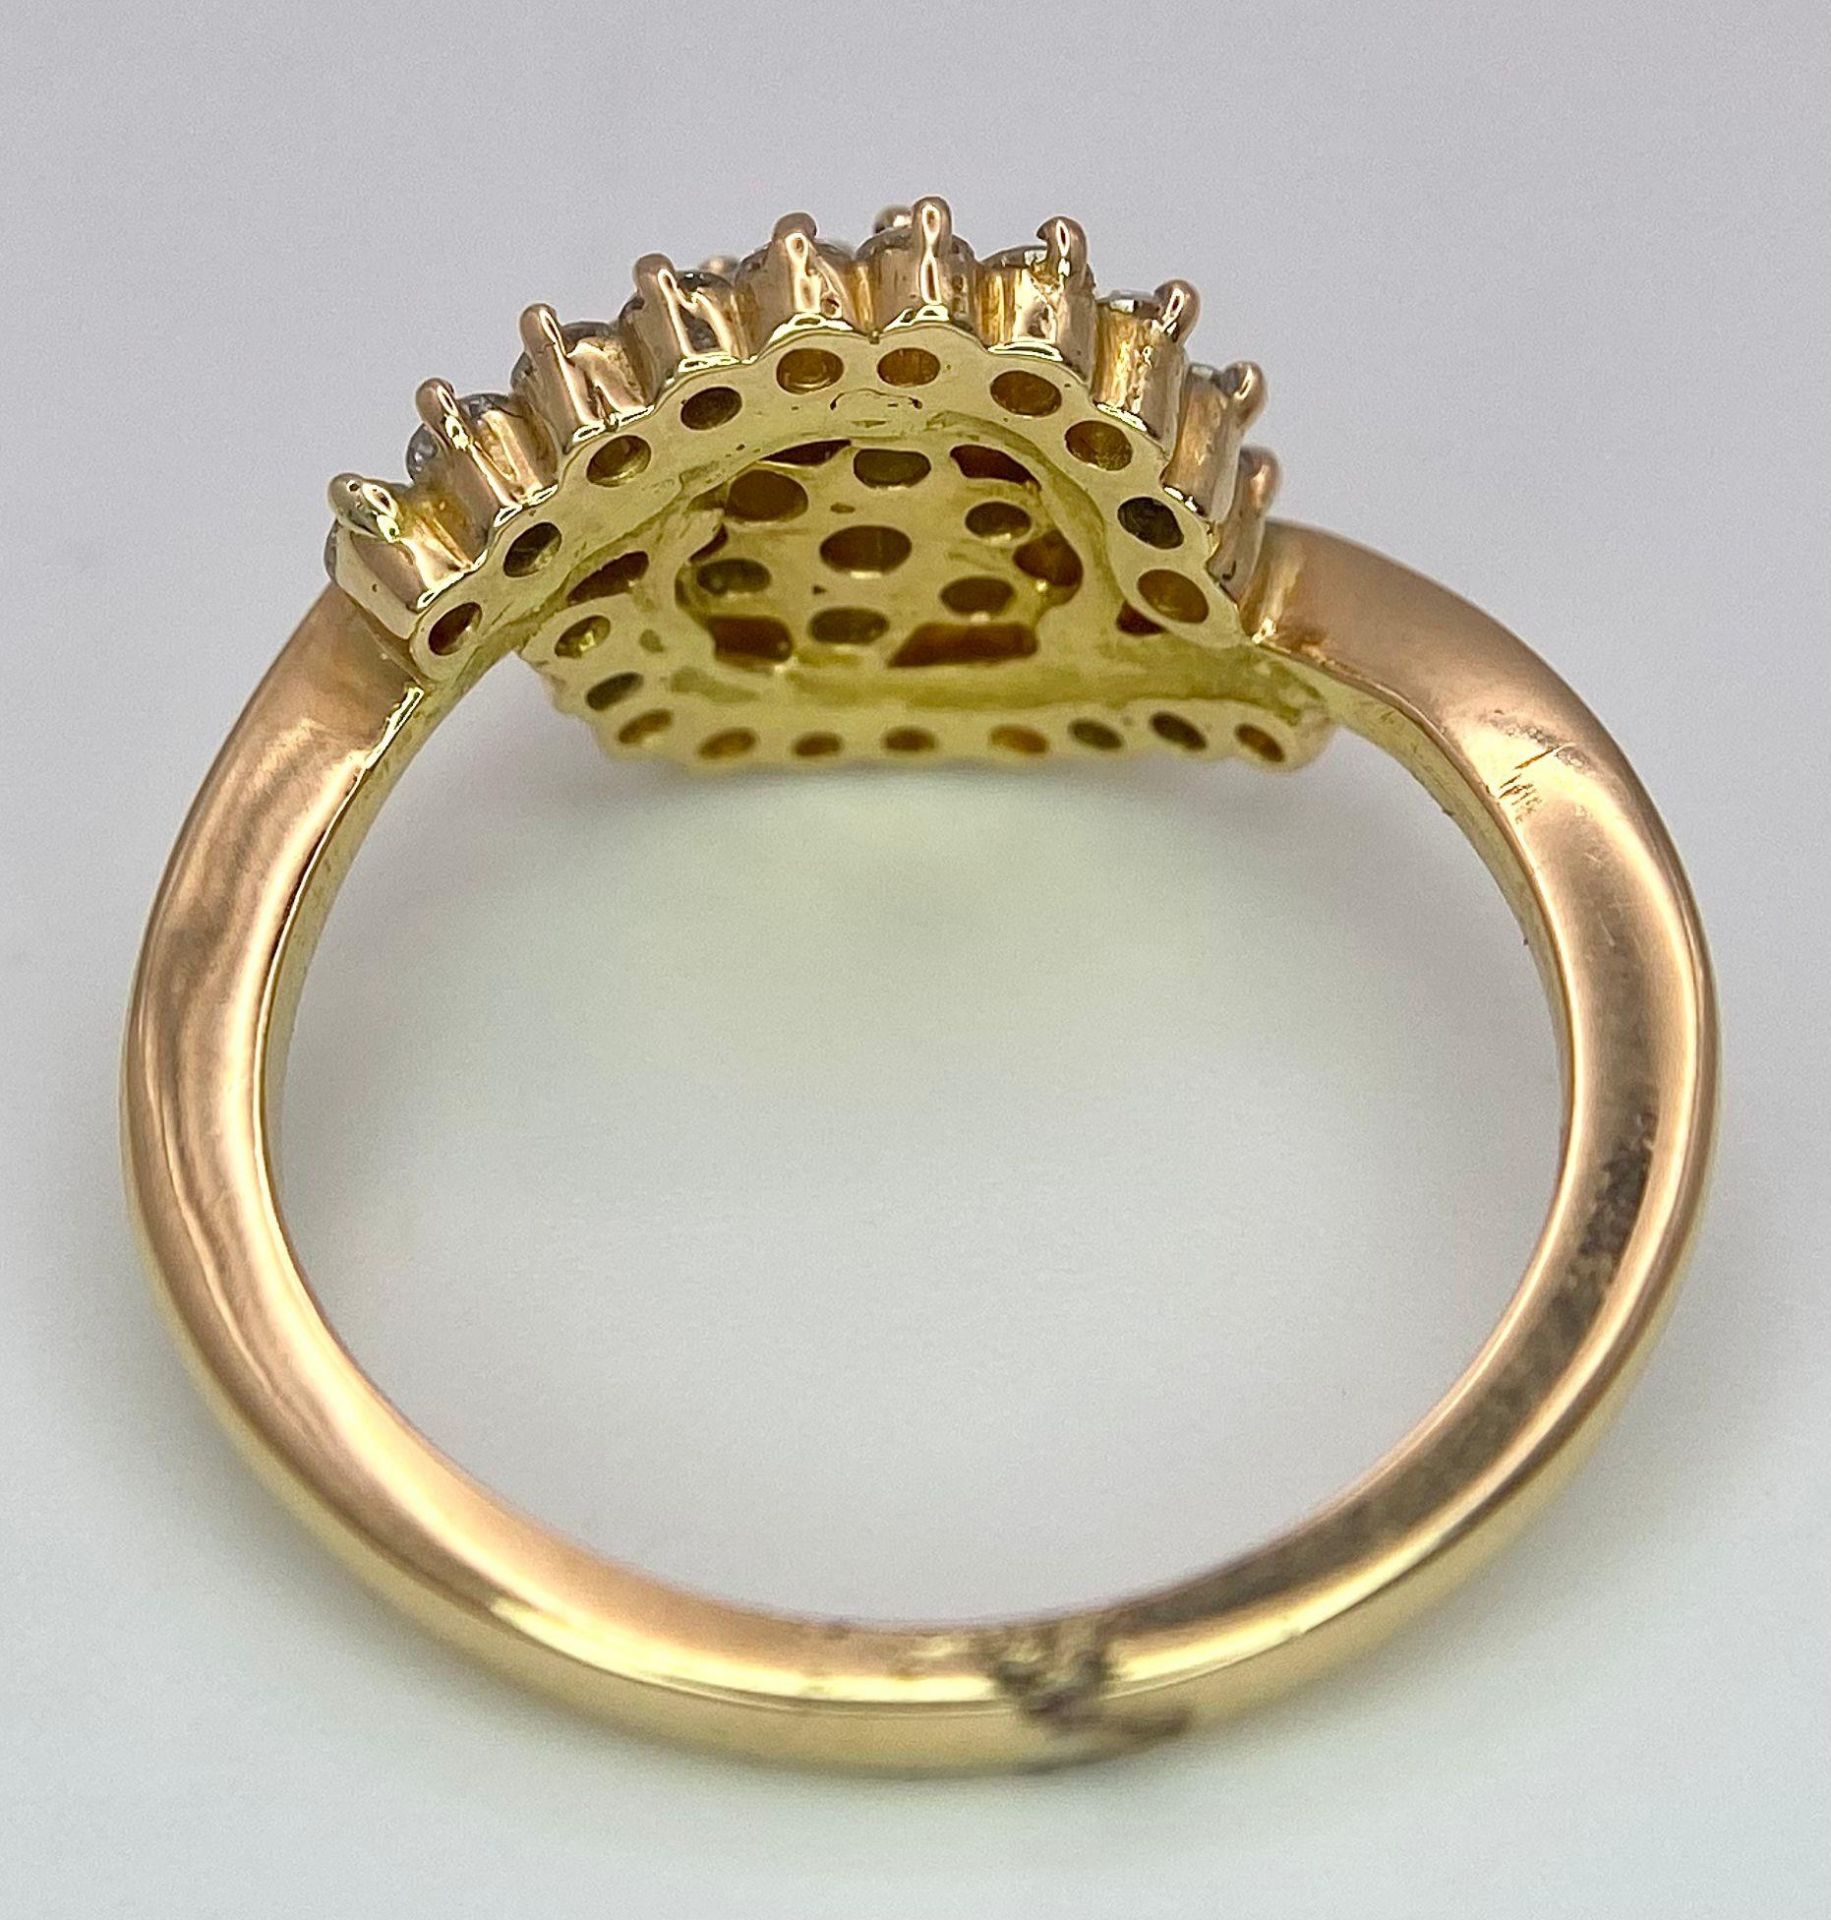 An attractive 14K Yellow Gold (tested as) Diamond Swirl Ring, 0.55ct diamond weight, 4.6g total - Image 5 of 6